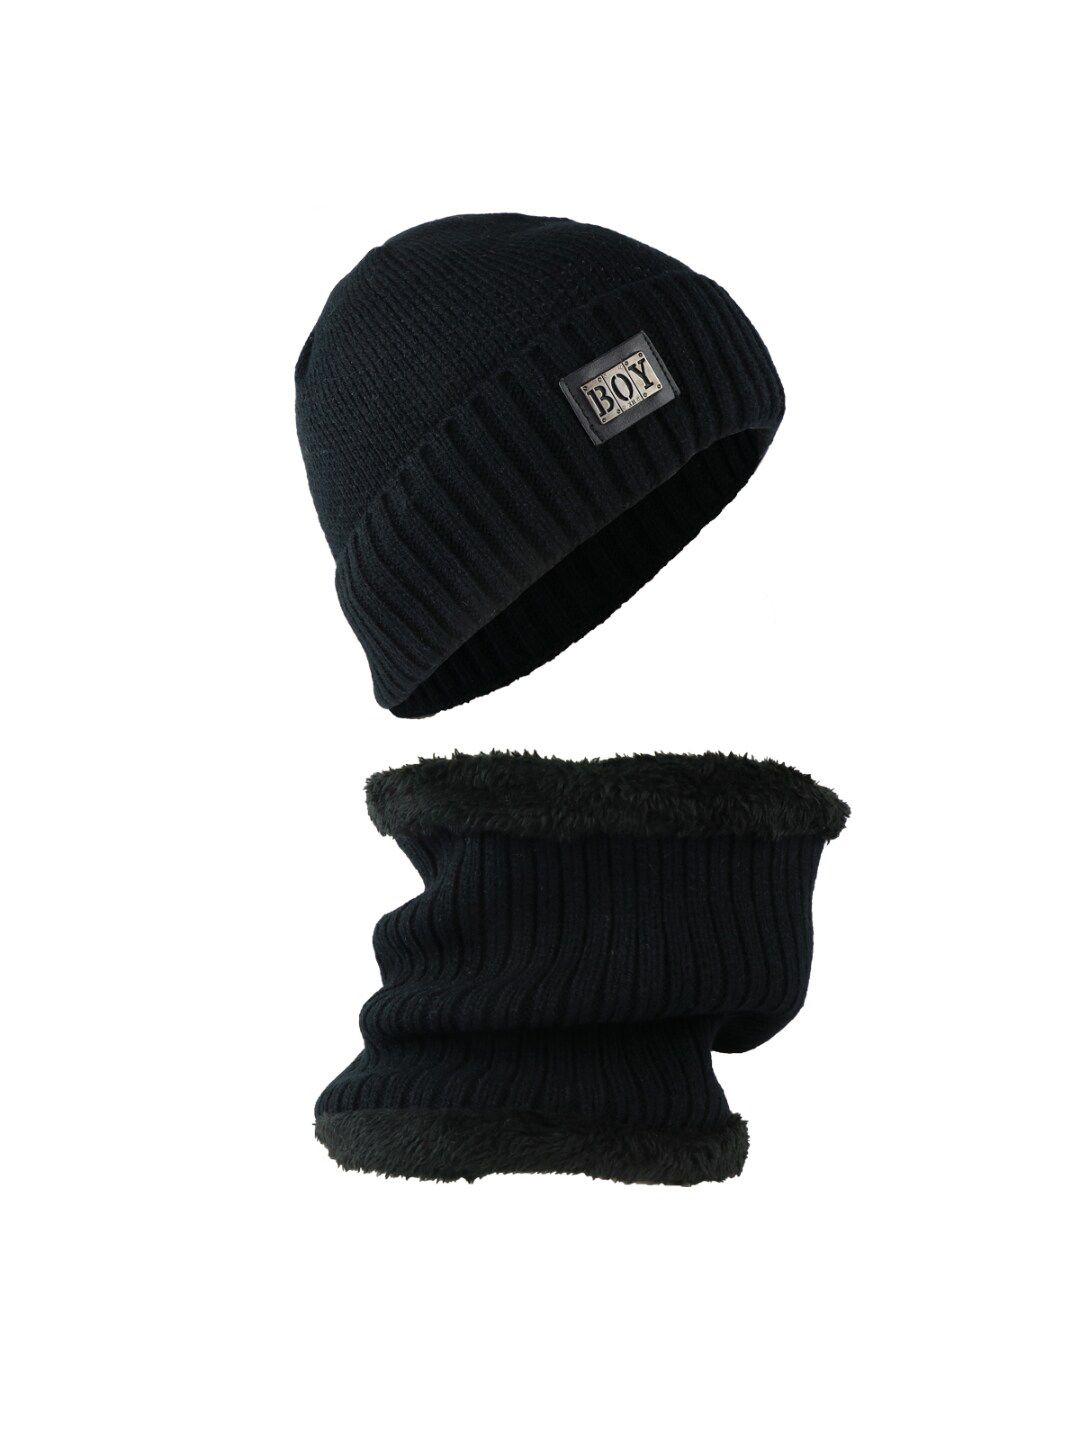 iSWEVEN Unisex Black Woolen Beanie Price in India